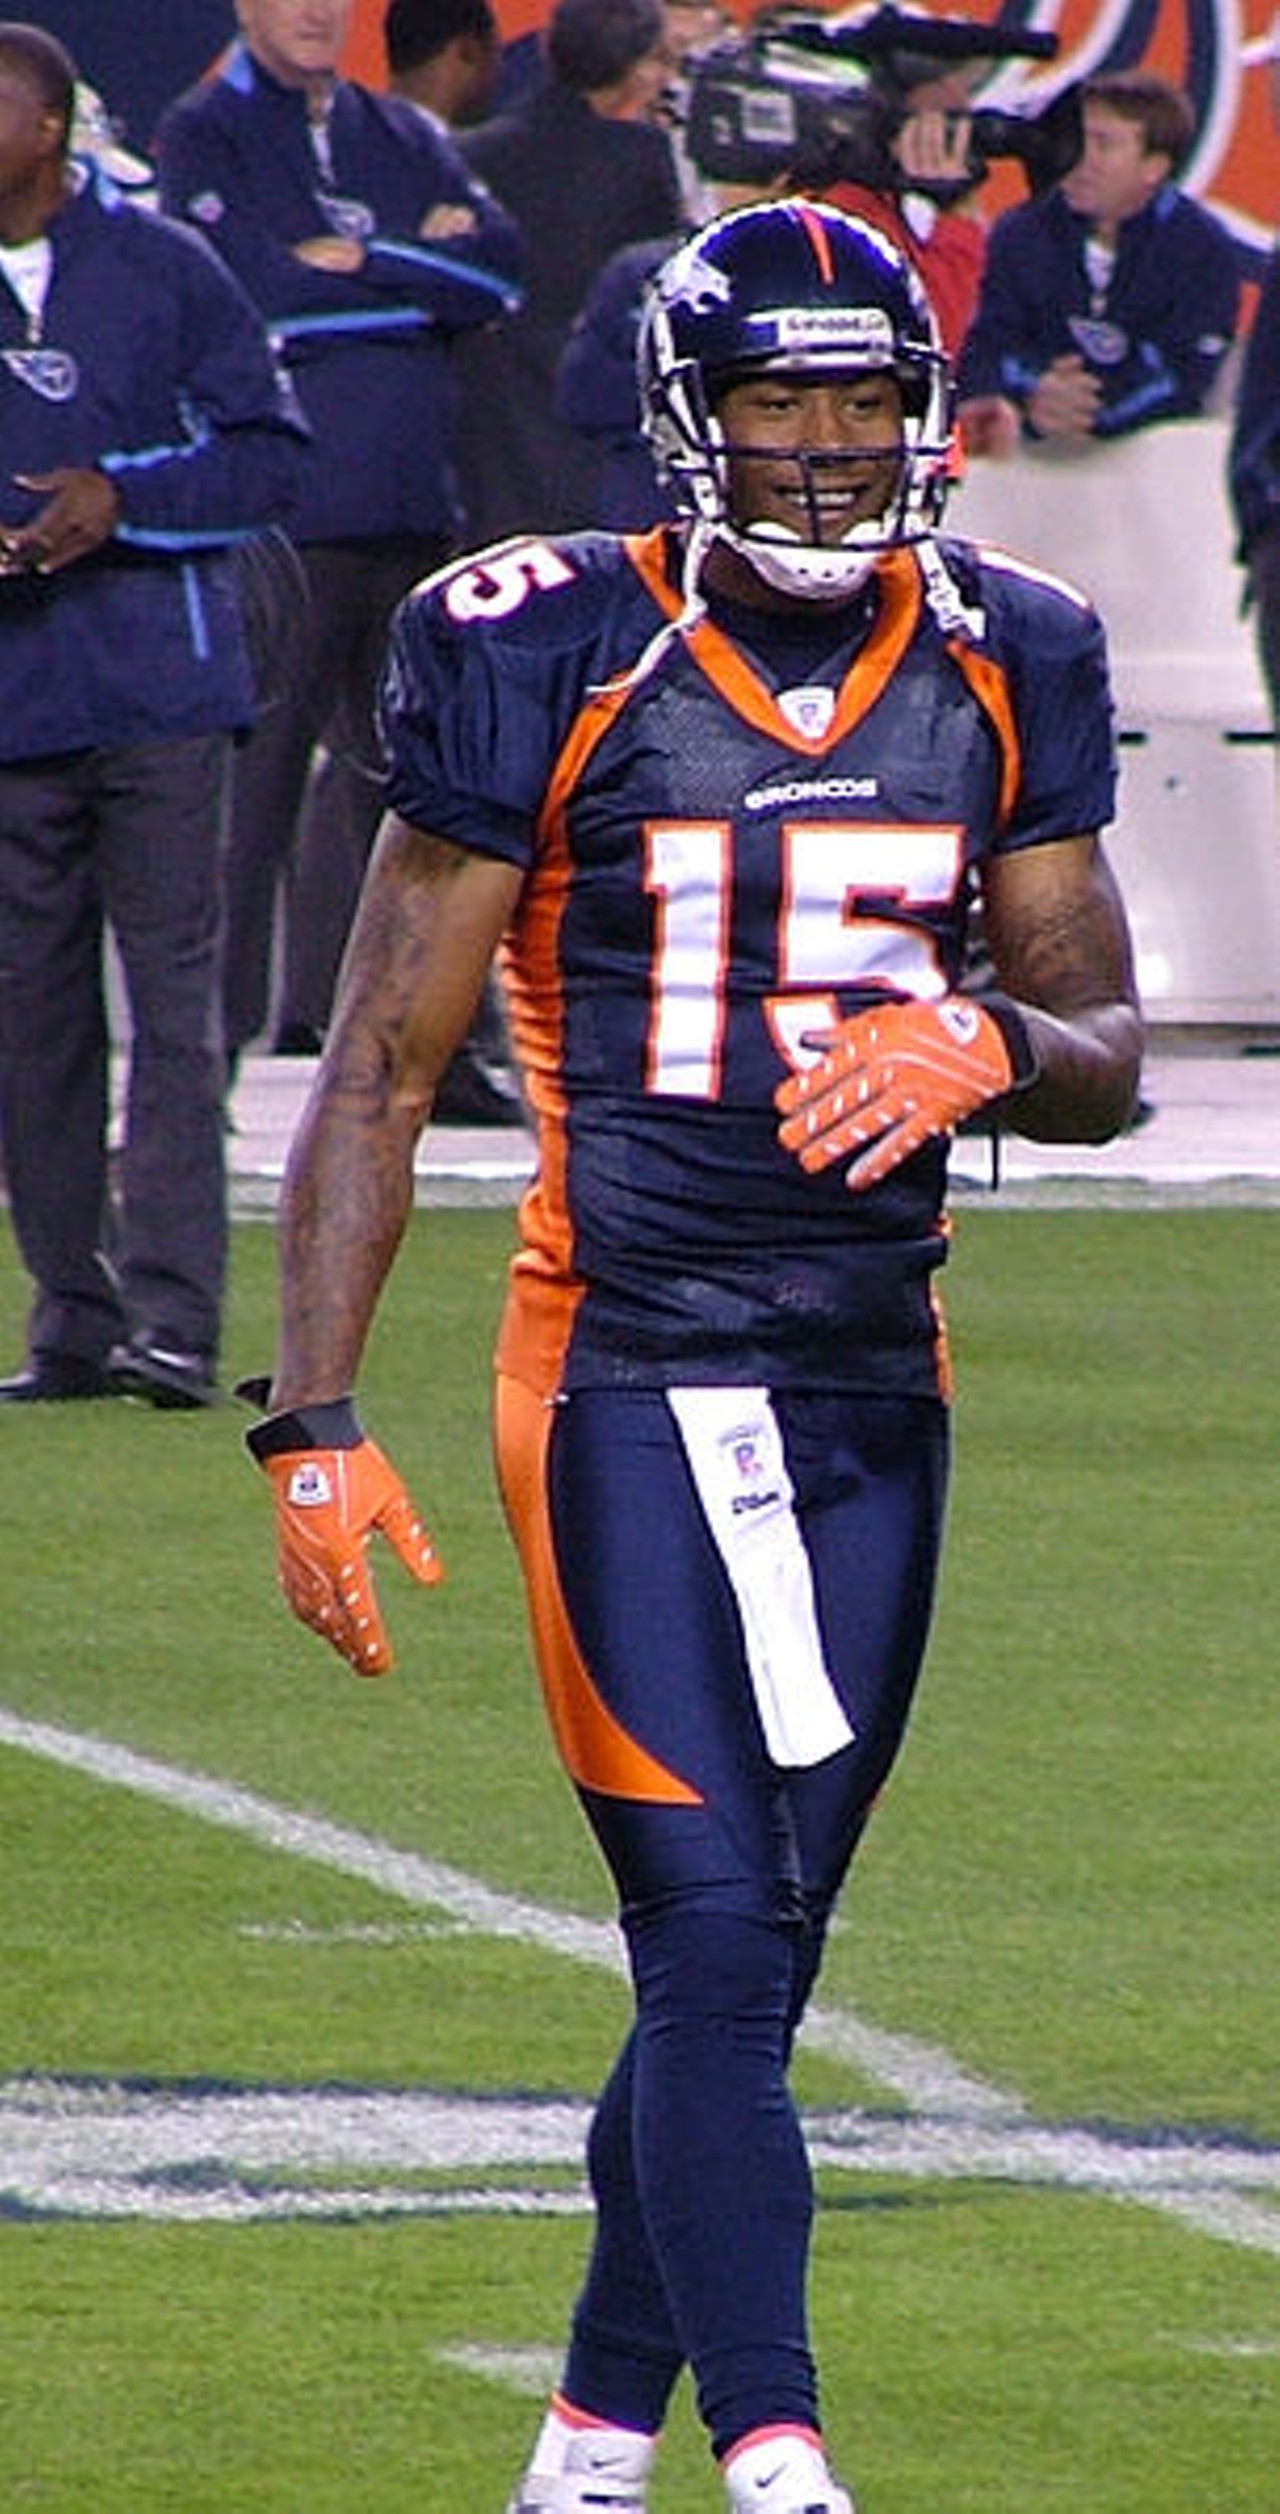 Brandon Marshall- An NFL wide receiver currently playing for the Chicago Bears.